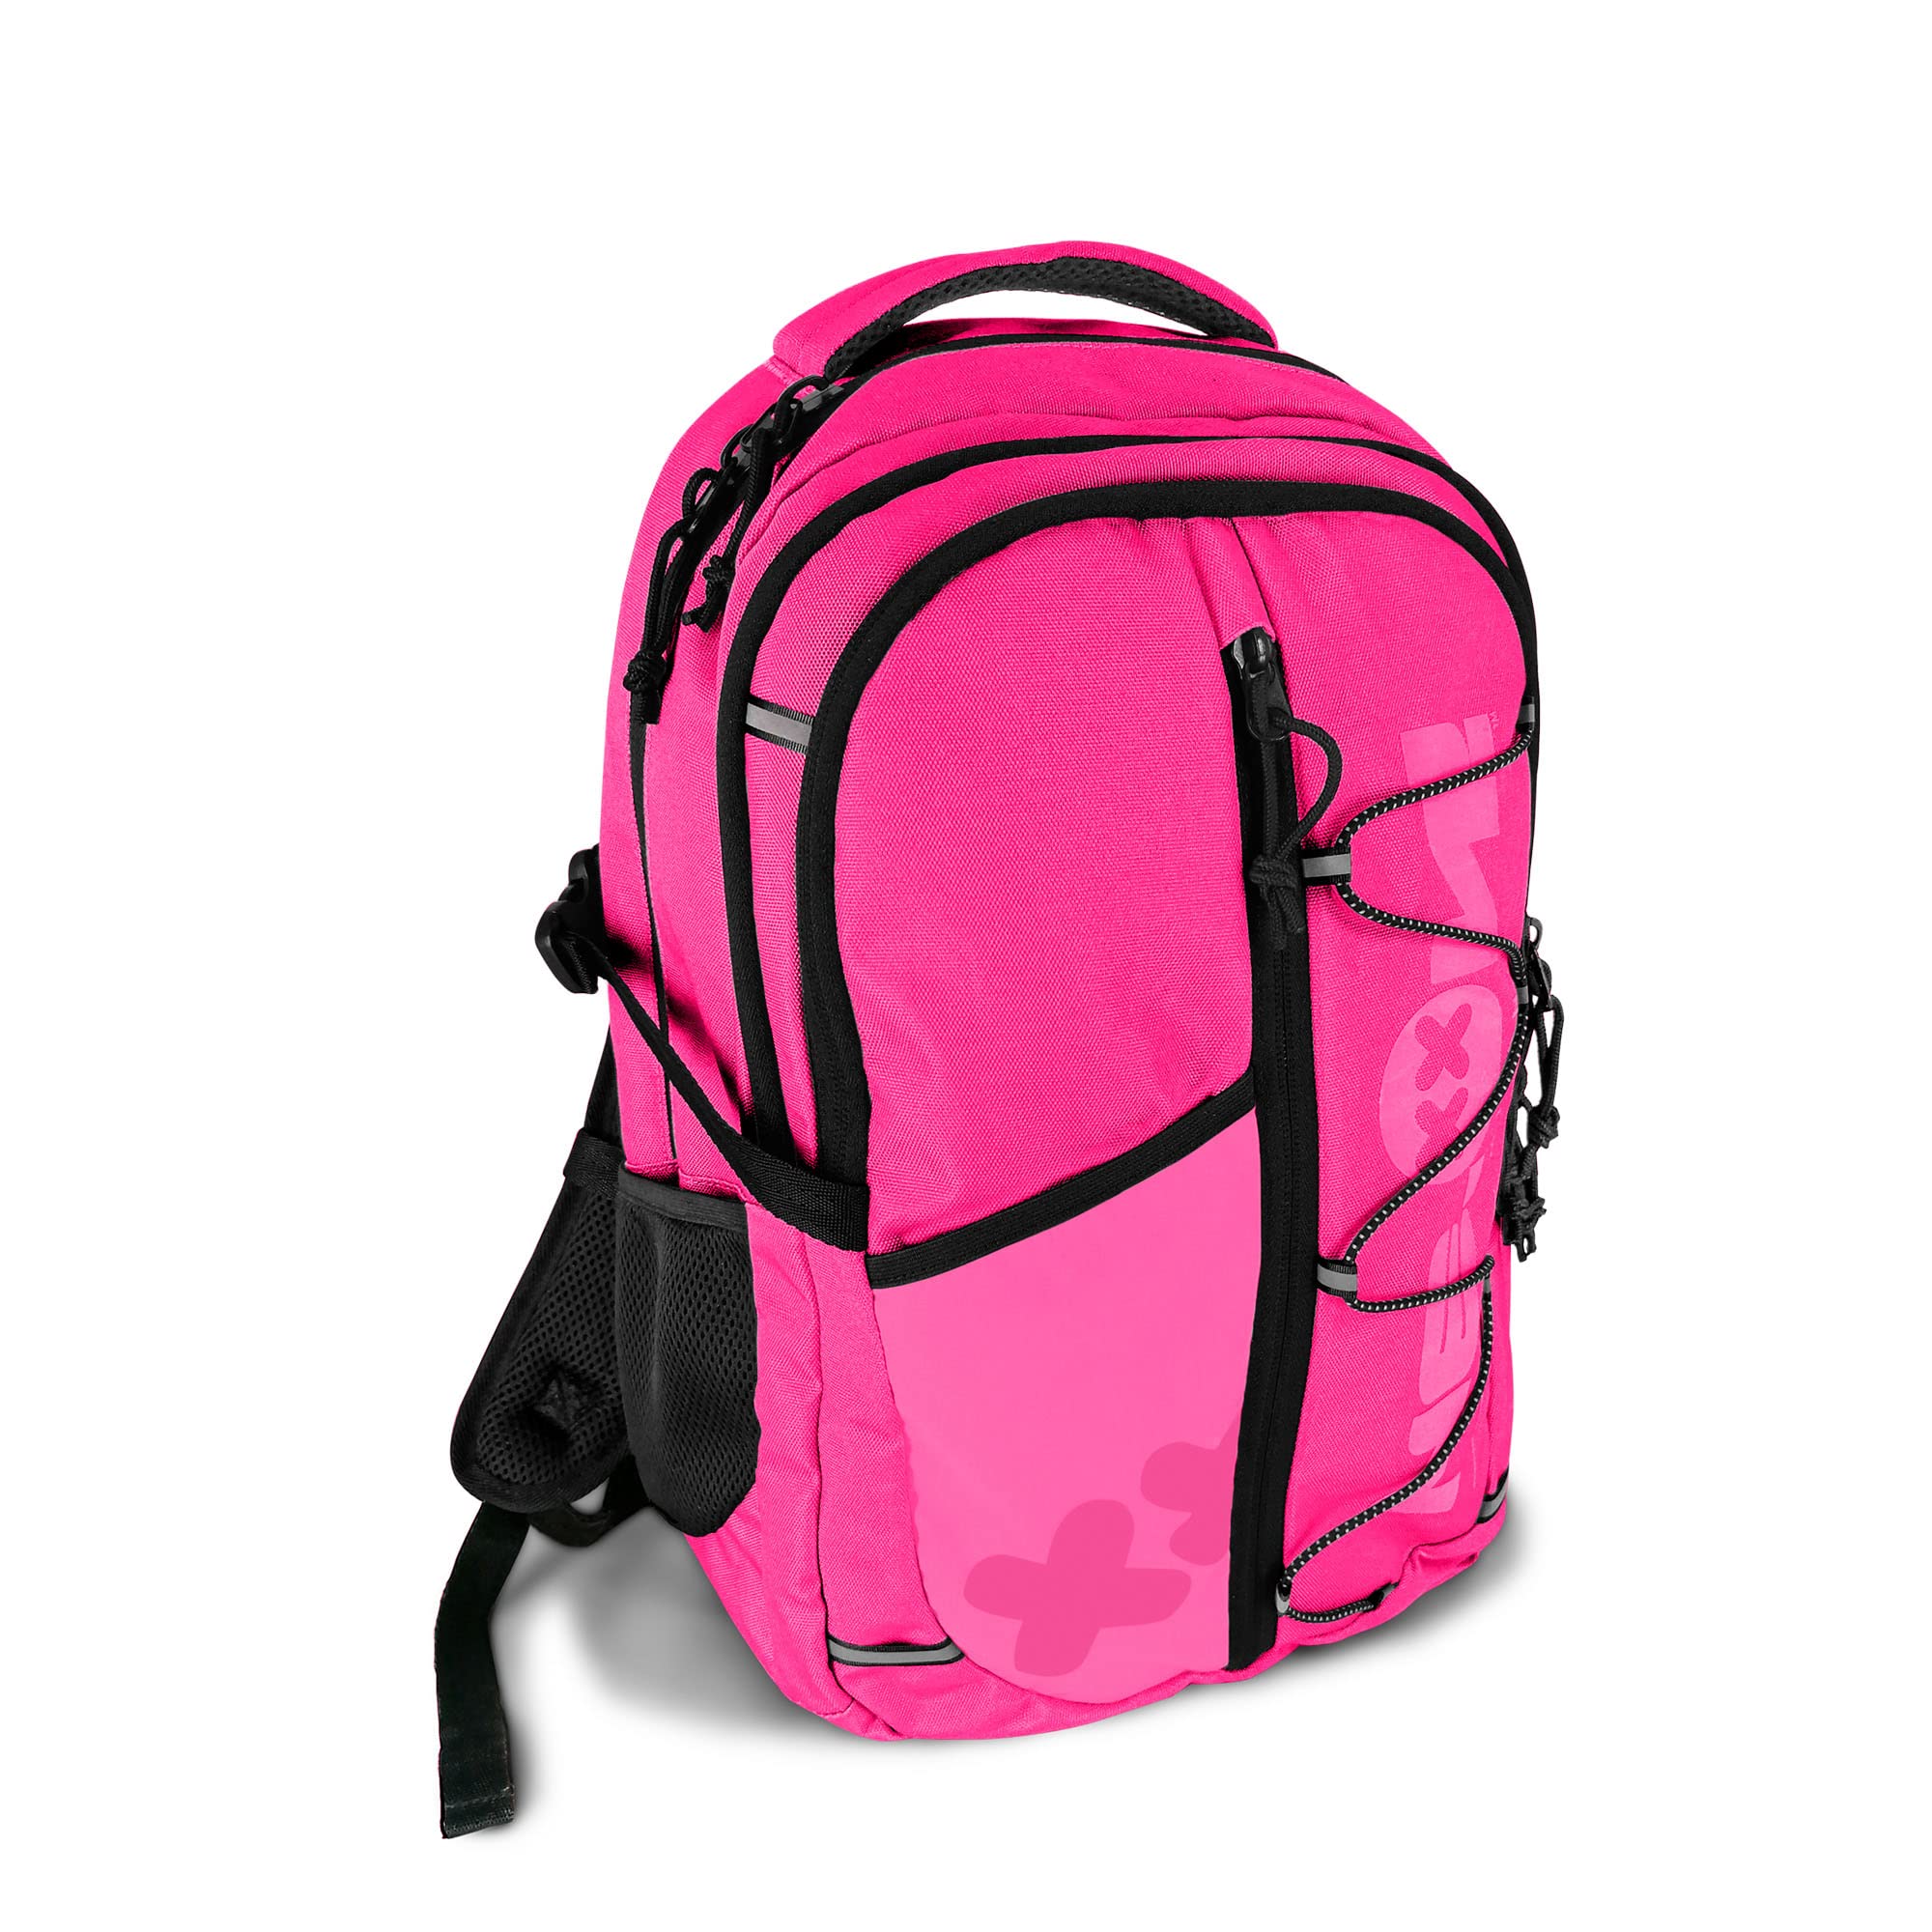 NEW CARRY BACKPACK FUCHSIA FLUO